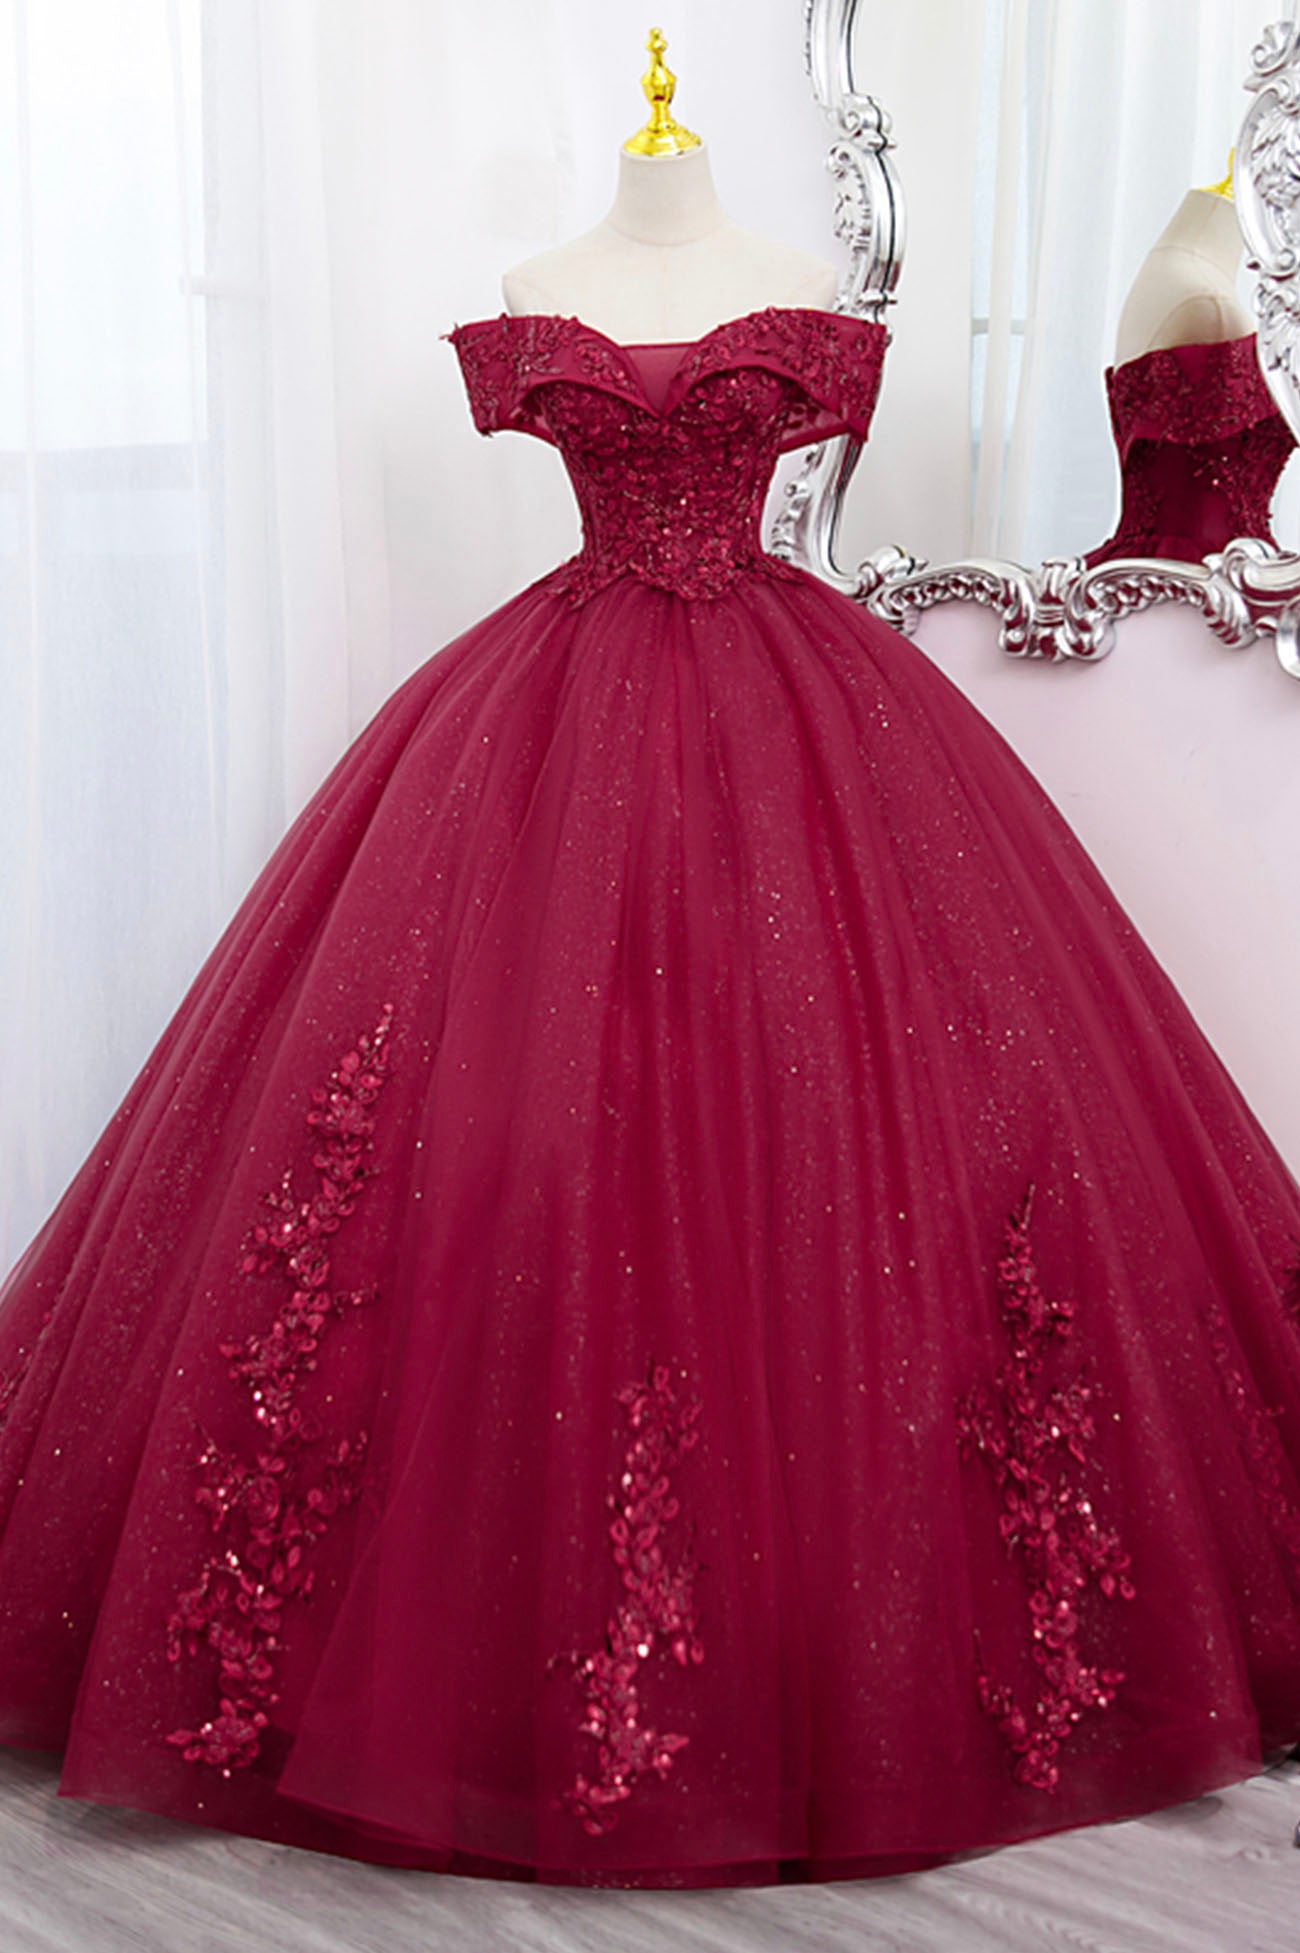 Belle of the Ball  Lace gown, Nice dresses, Romantic dress